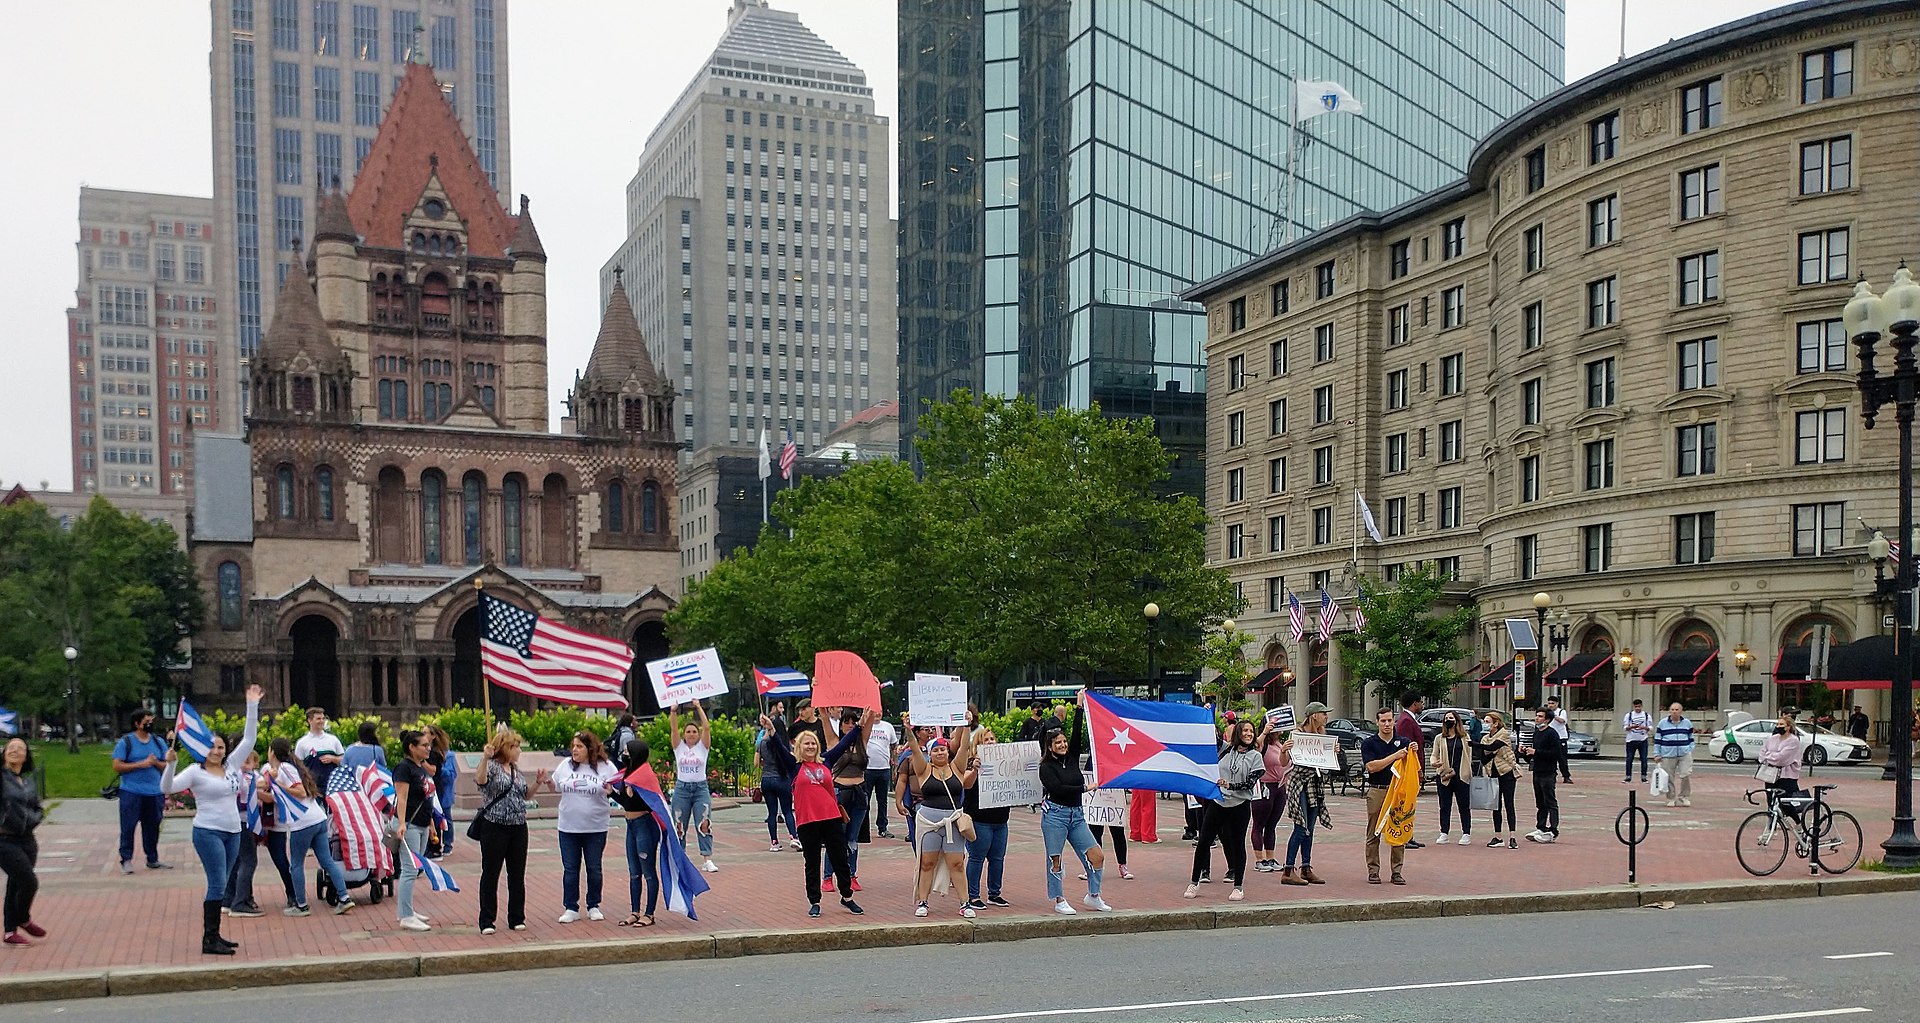 A protest against the Cuban government in Copley Square, Boston, Massachusetts.